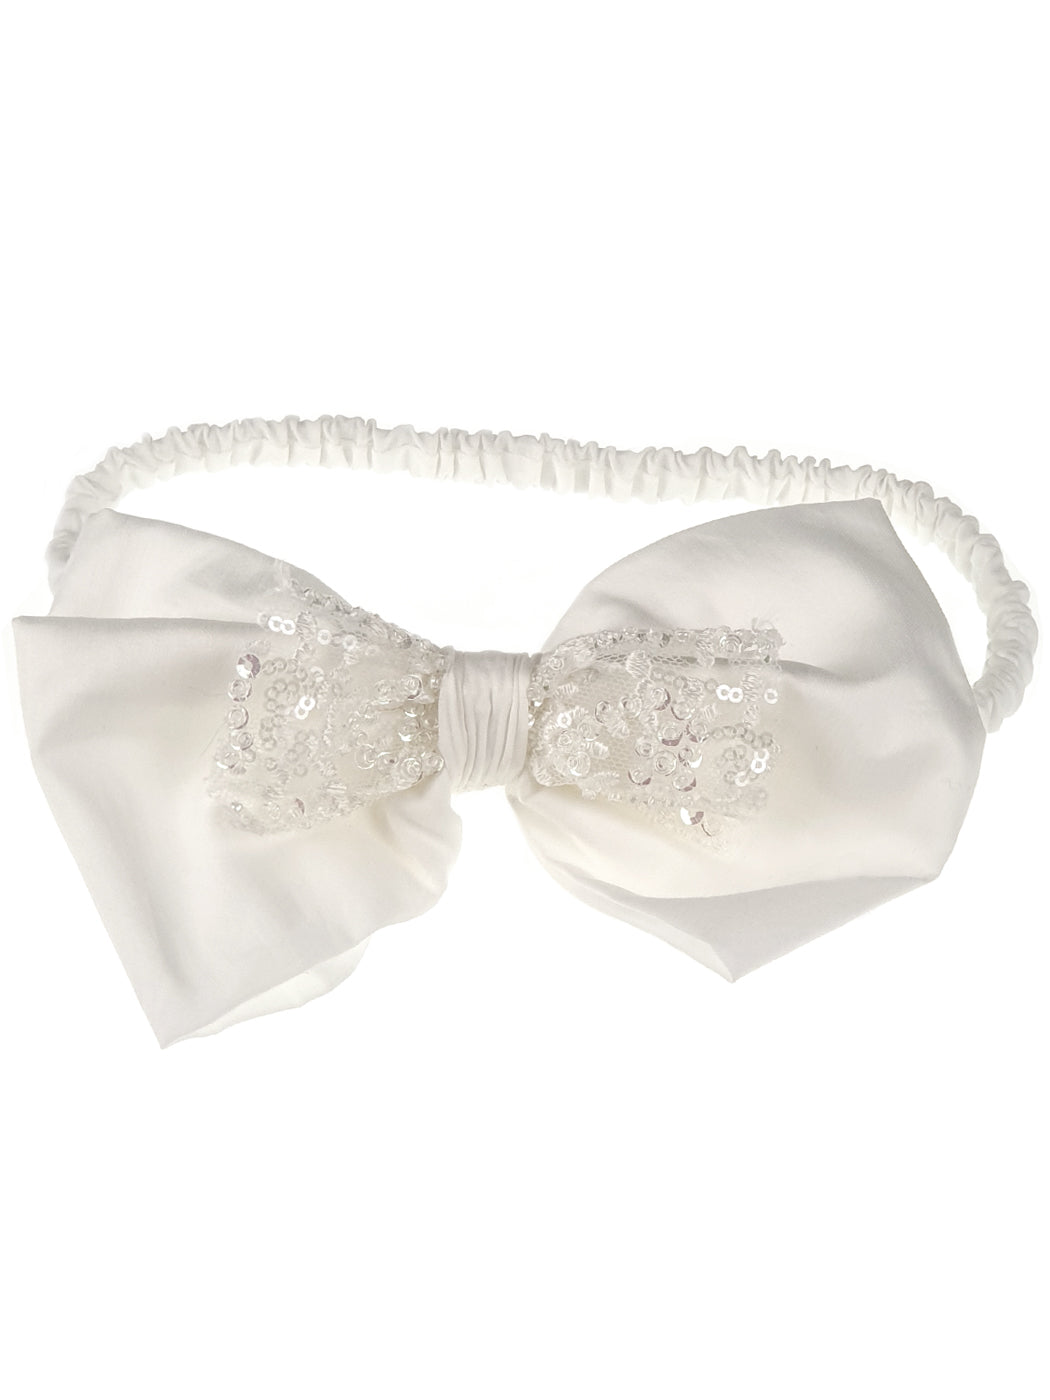 Girl's Headband bow with lace and sequins  - MARIPOZA